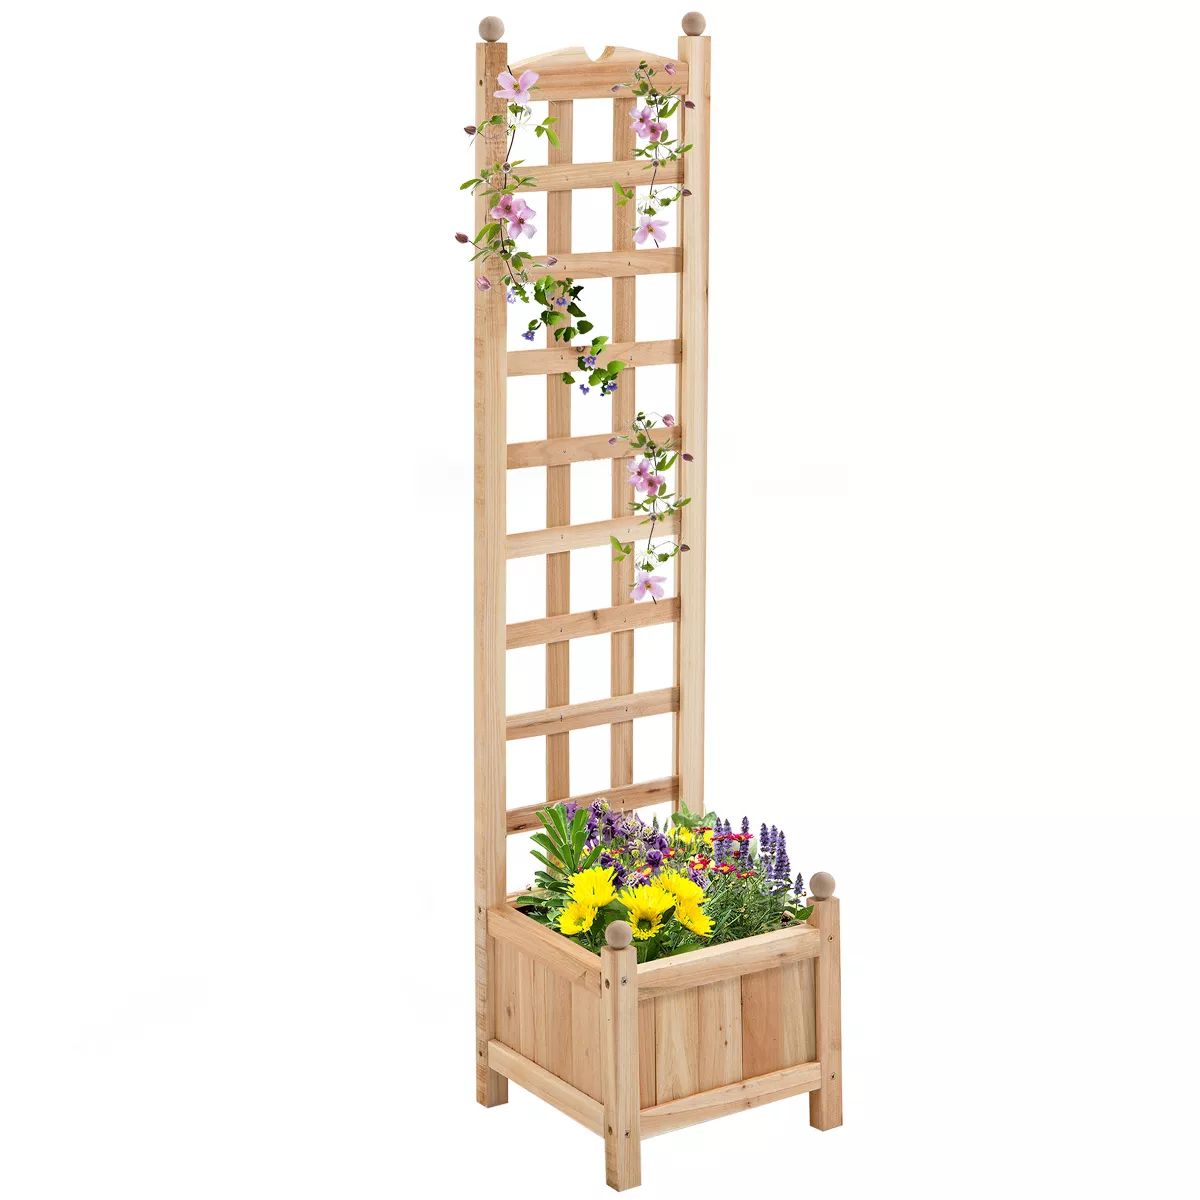 Outsunny Raised Garden Bed with Trellis Board Back & Strong Wooden Design & Materials | Target